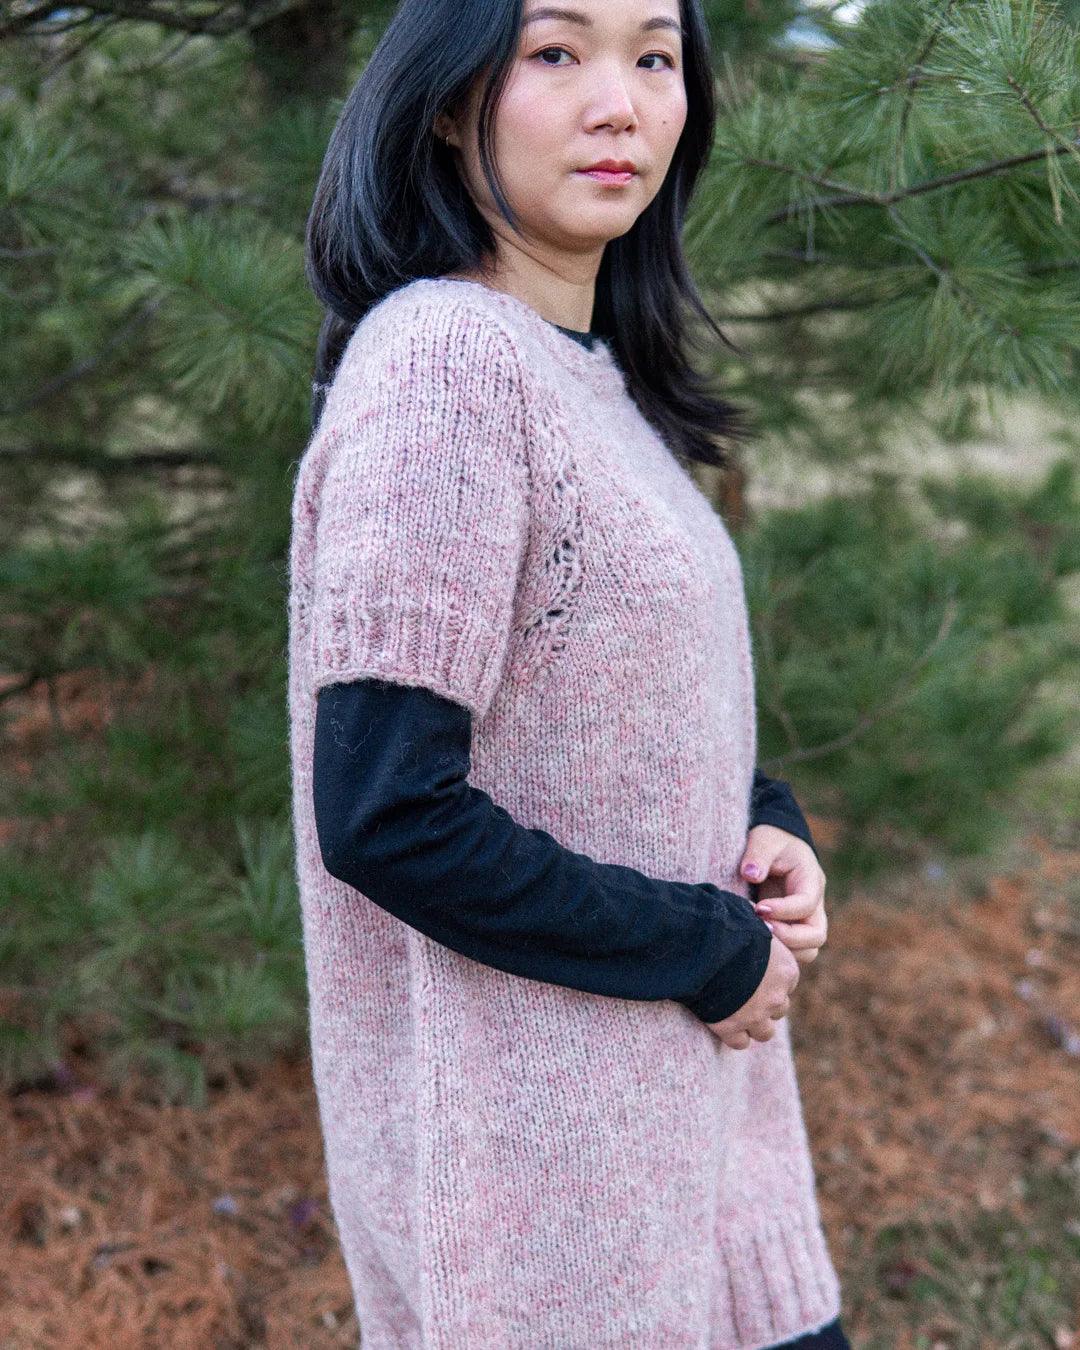 Weekday Dress + Pullover - Knitting Pattern (PDF) - Aimee Sher Makes